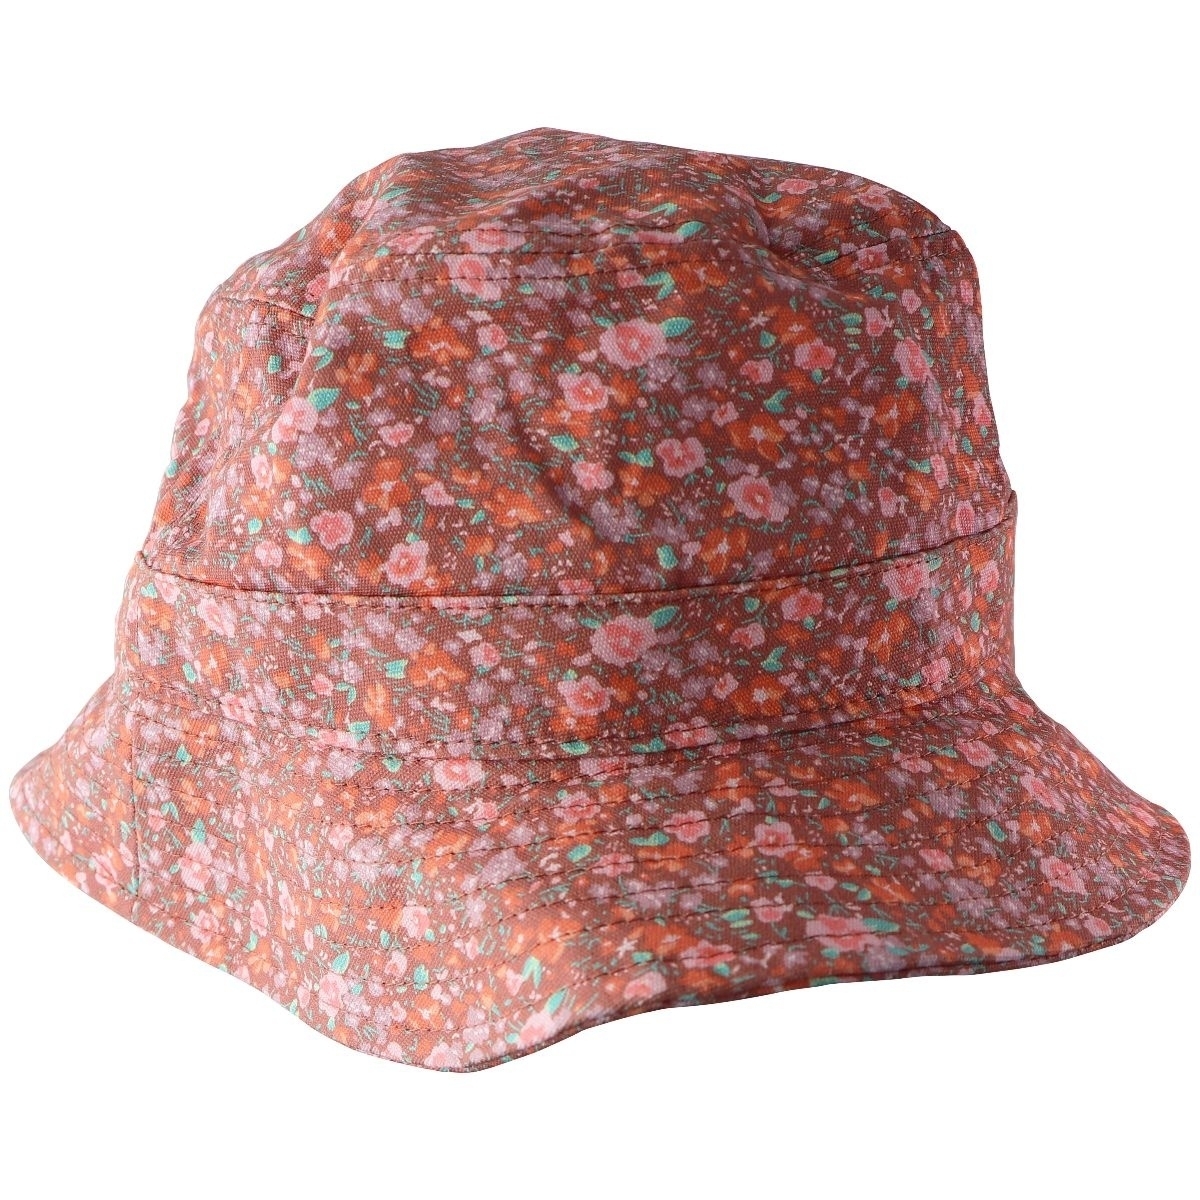 AEROPOSTALE Floral Bucket Hat (One Size Fits All) - Red / Floral